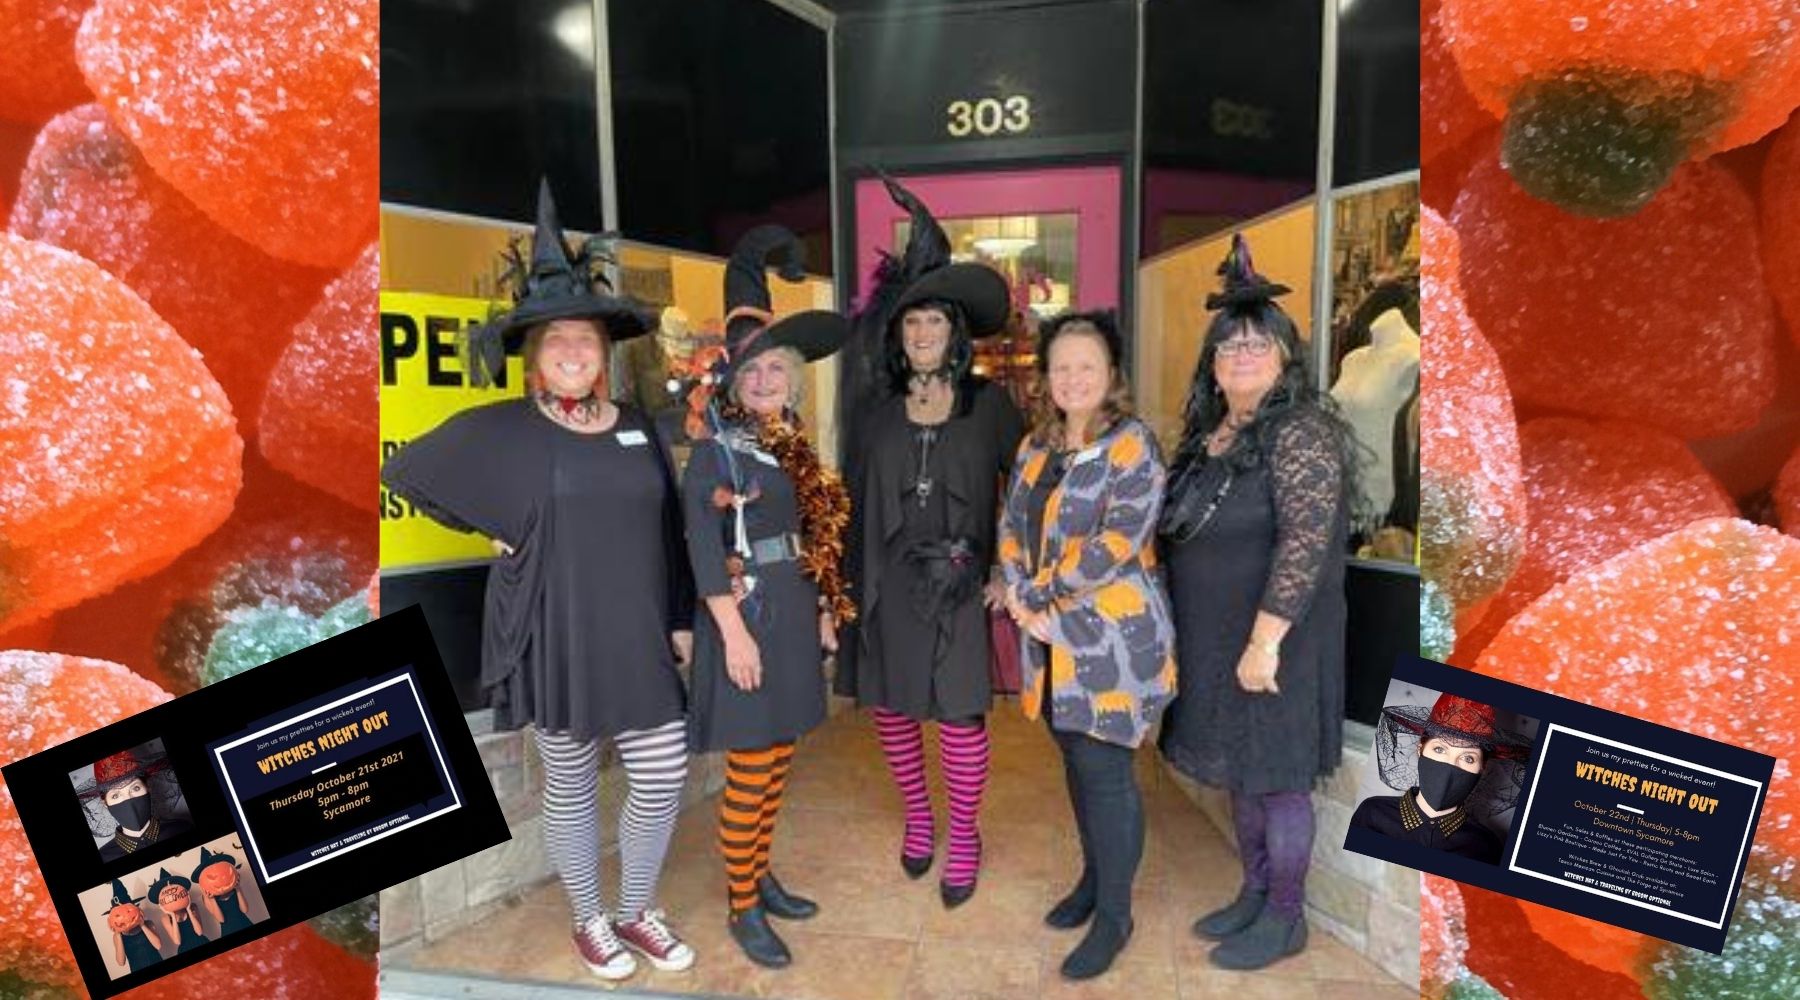 Thank You Witches Night Out 2021